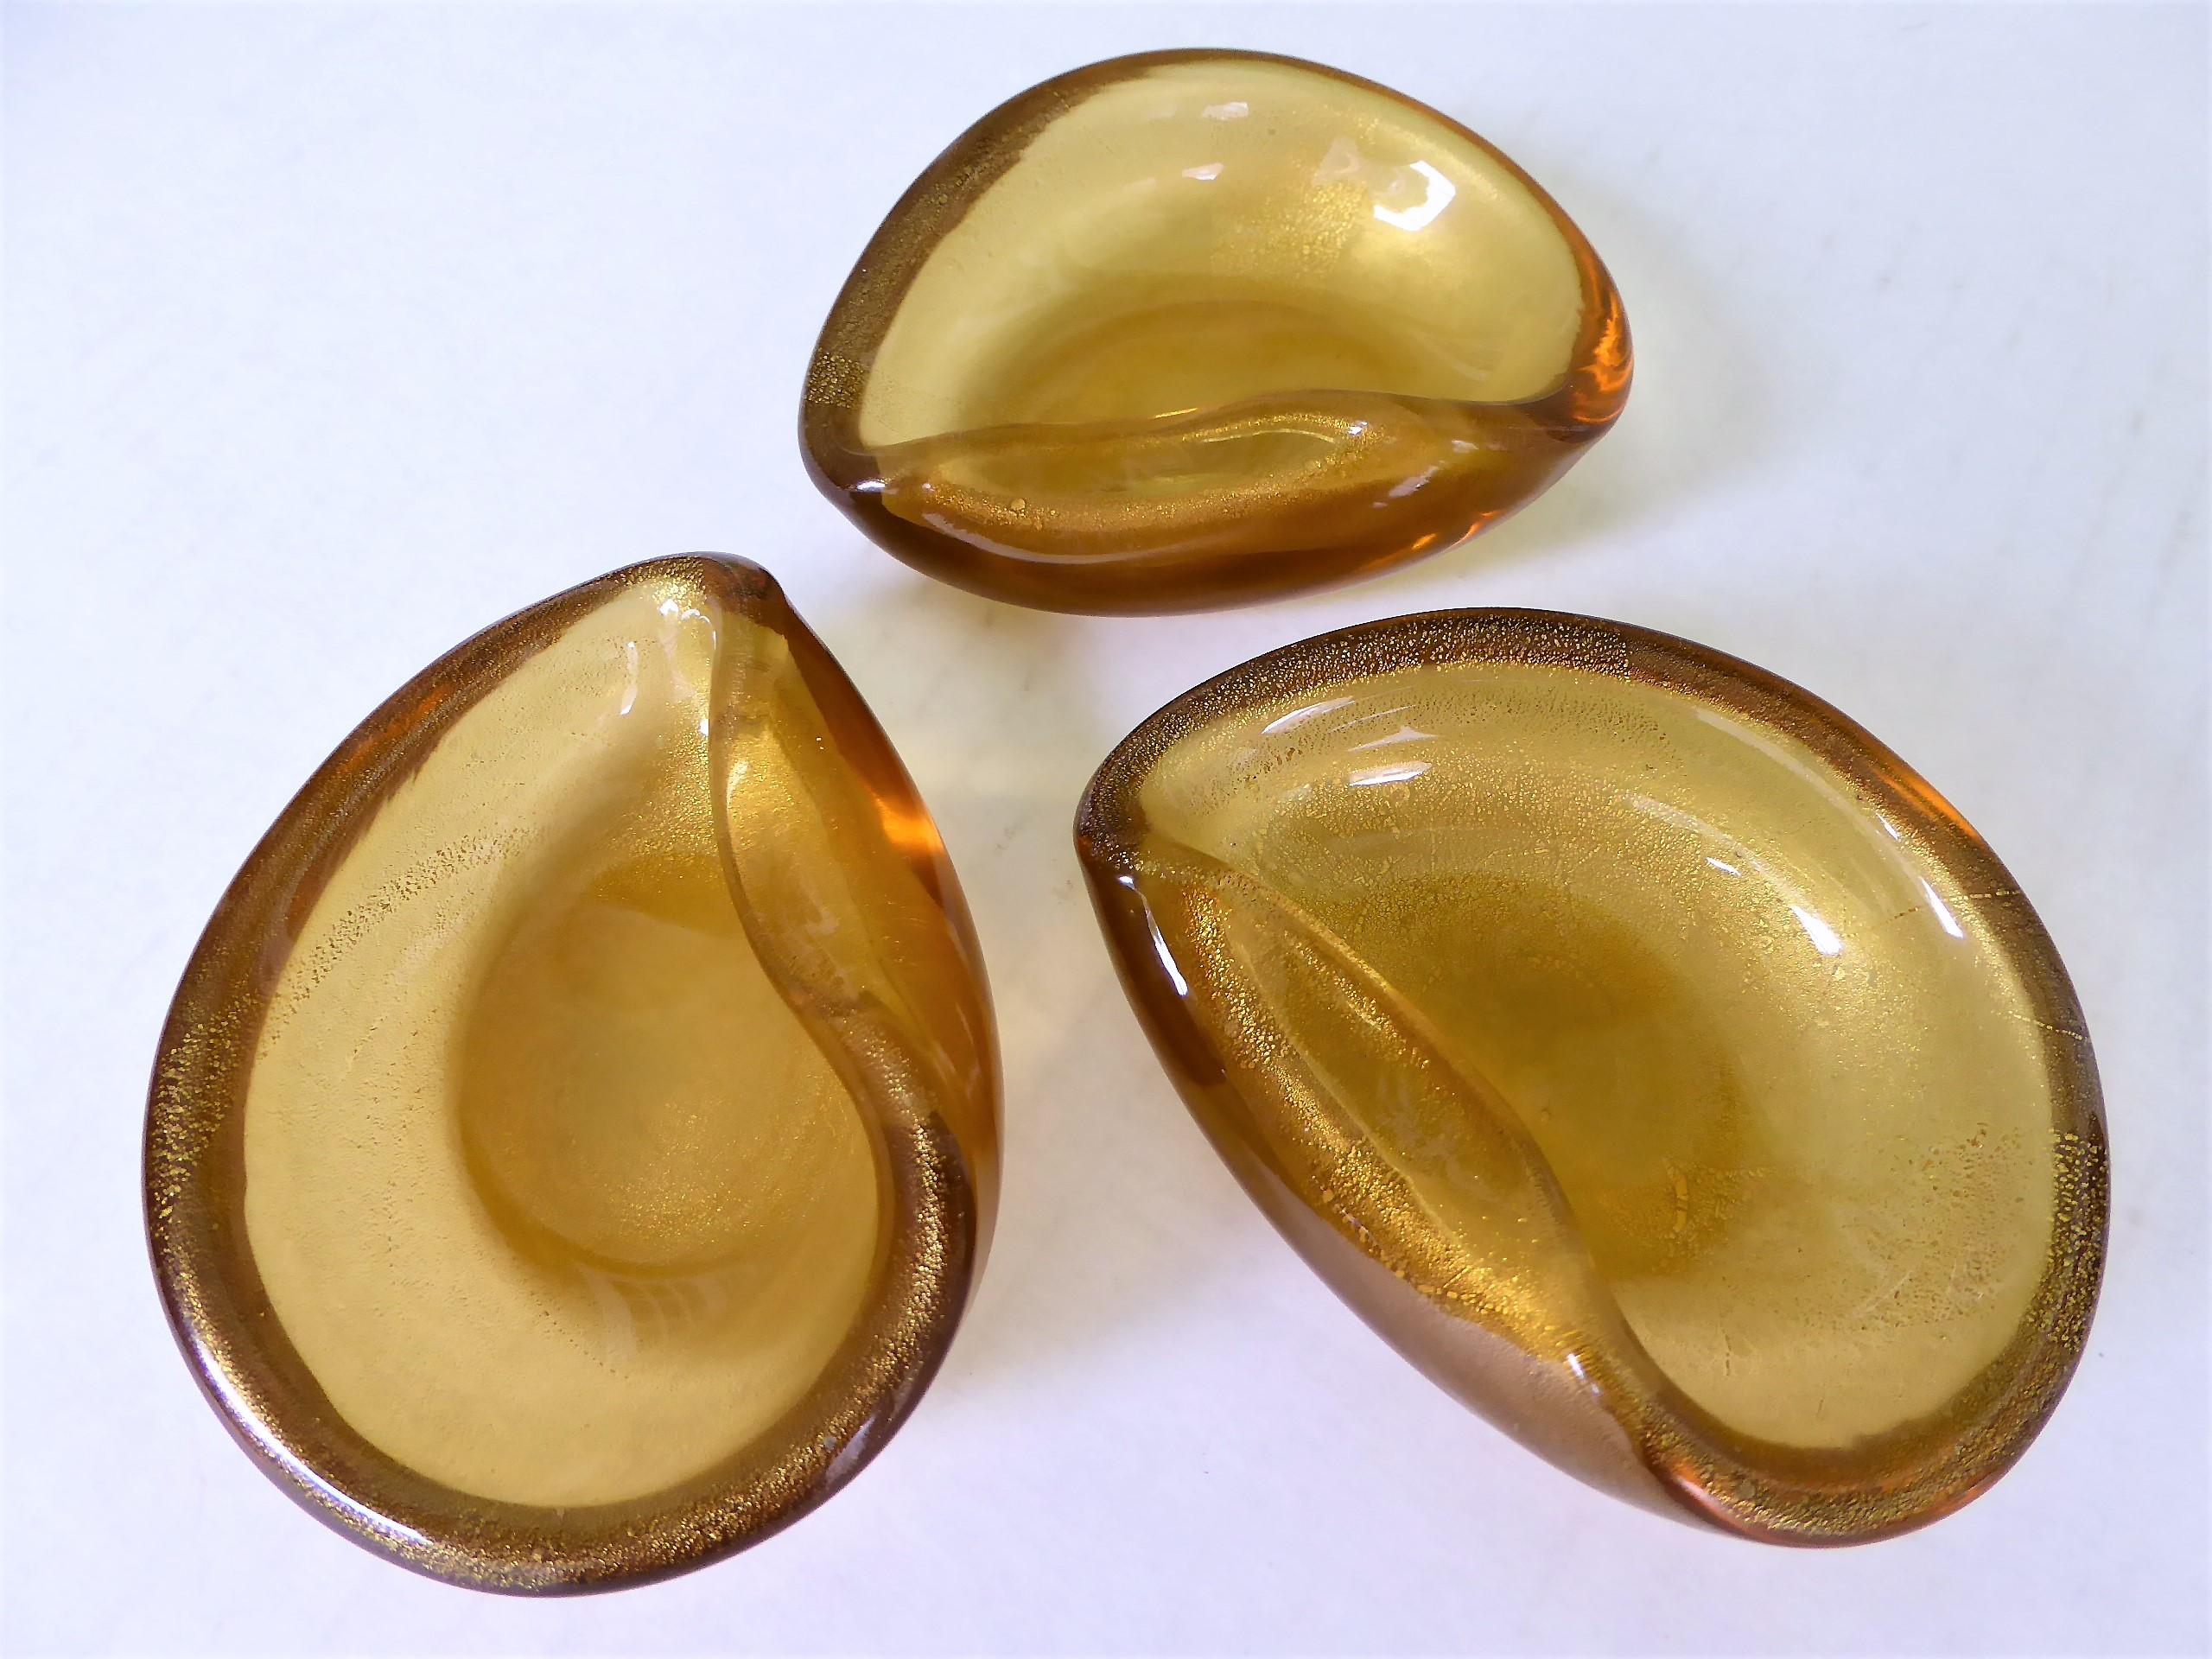 Wonderful Murano creations. Three clam shell or ear shaped vessels of blown glass with gold leaf inclusions. Wonderfully blown and shaped. For use as salt cellars or originally probably as small individual ashtrays.

Measurements each: 3 1/2